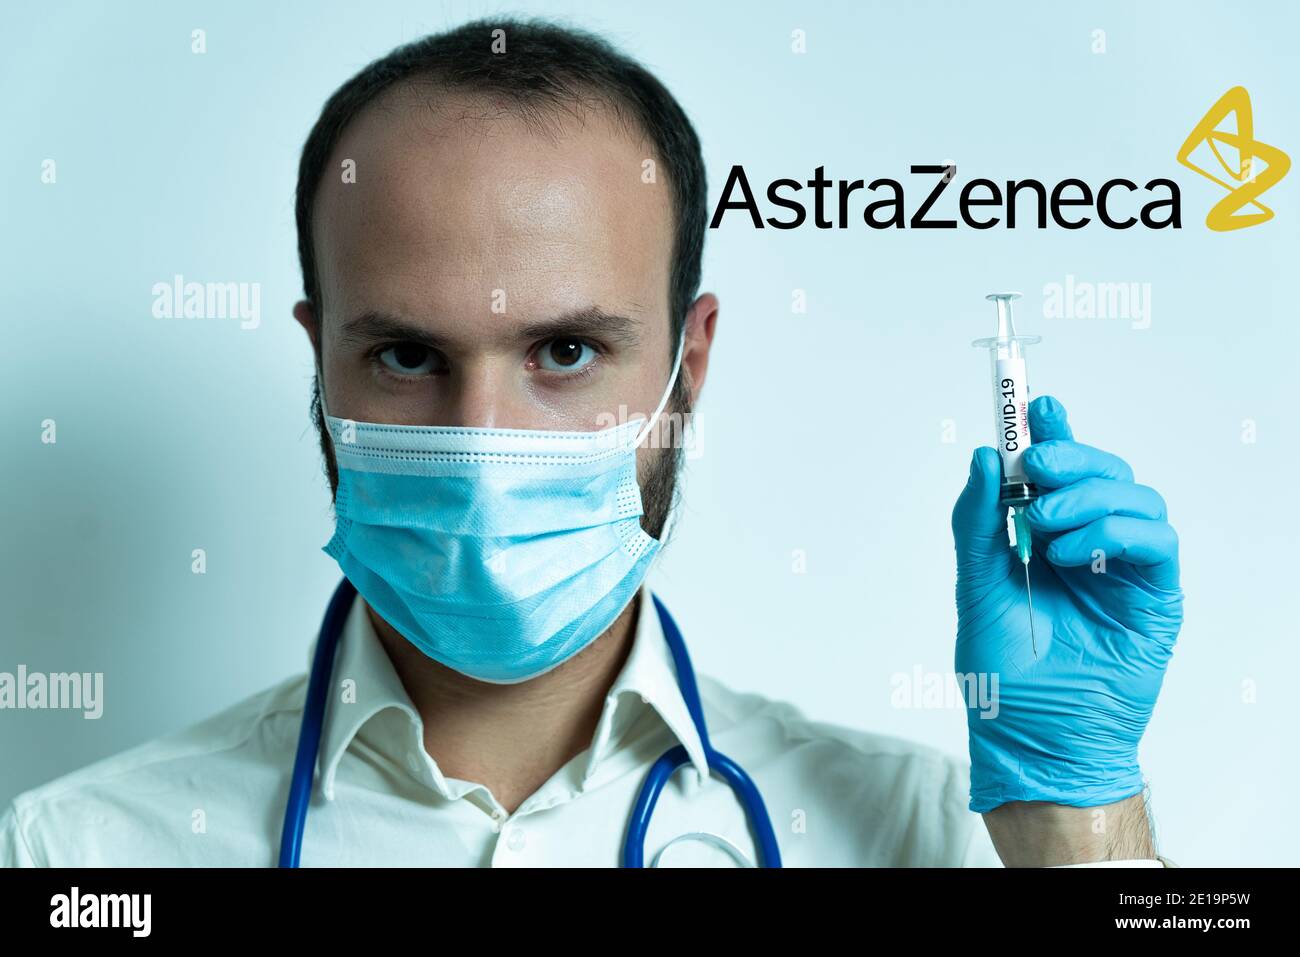 London, UK - 5 january 2021: young male doctor holding astrazeneca covid-19 vaccine syringe. concept of science and coronavirus vaccine. face mask and Stock Photo